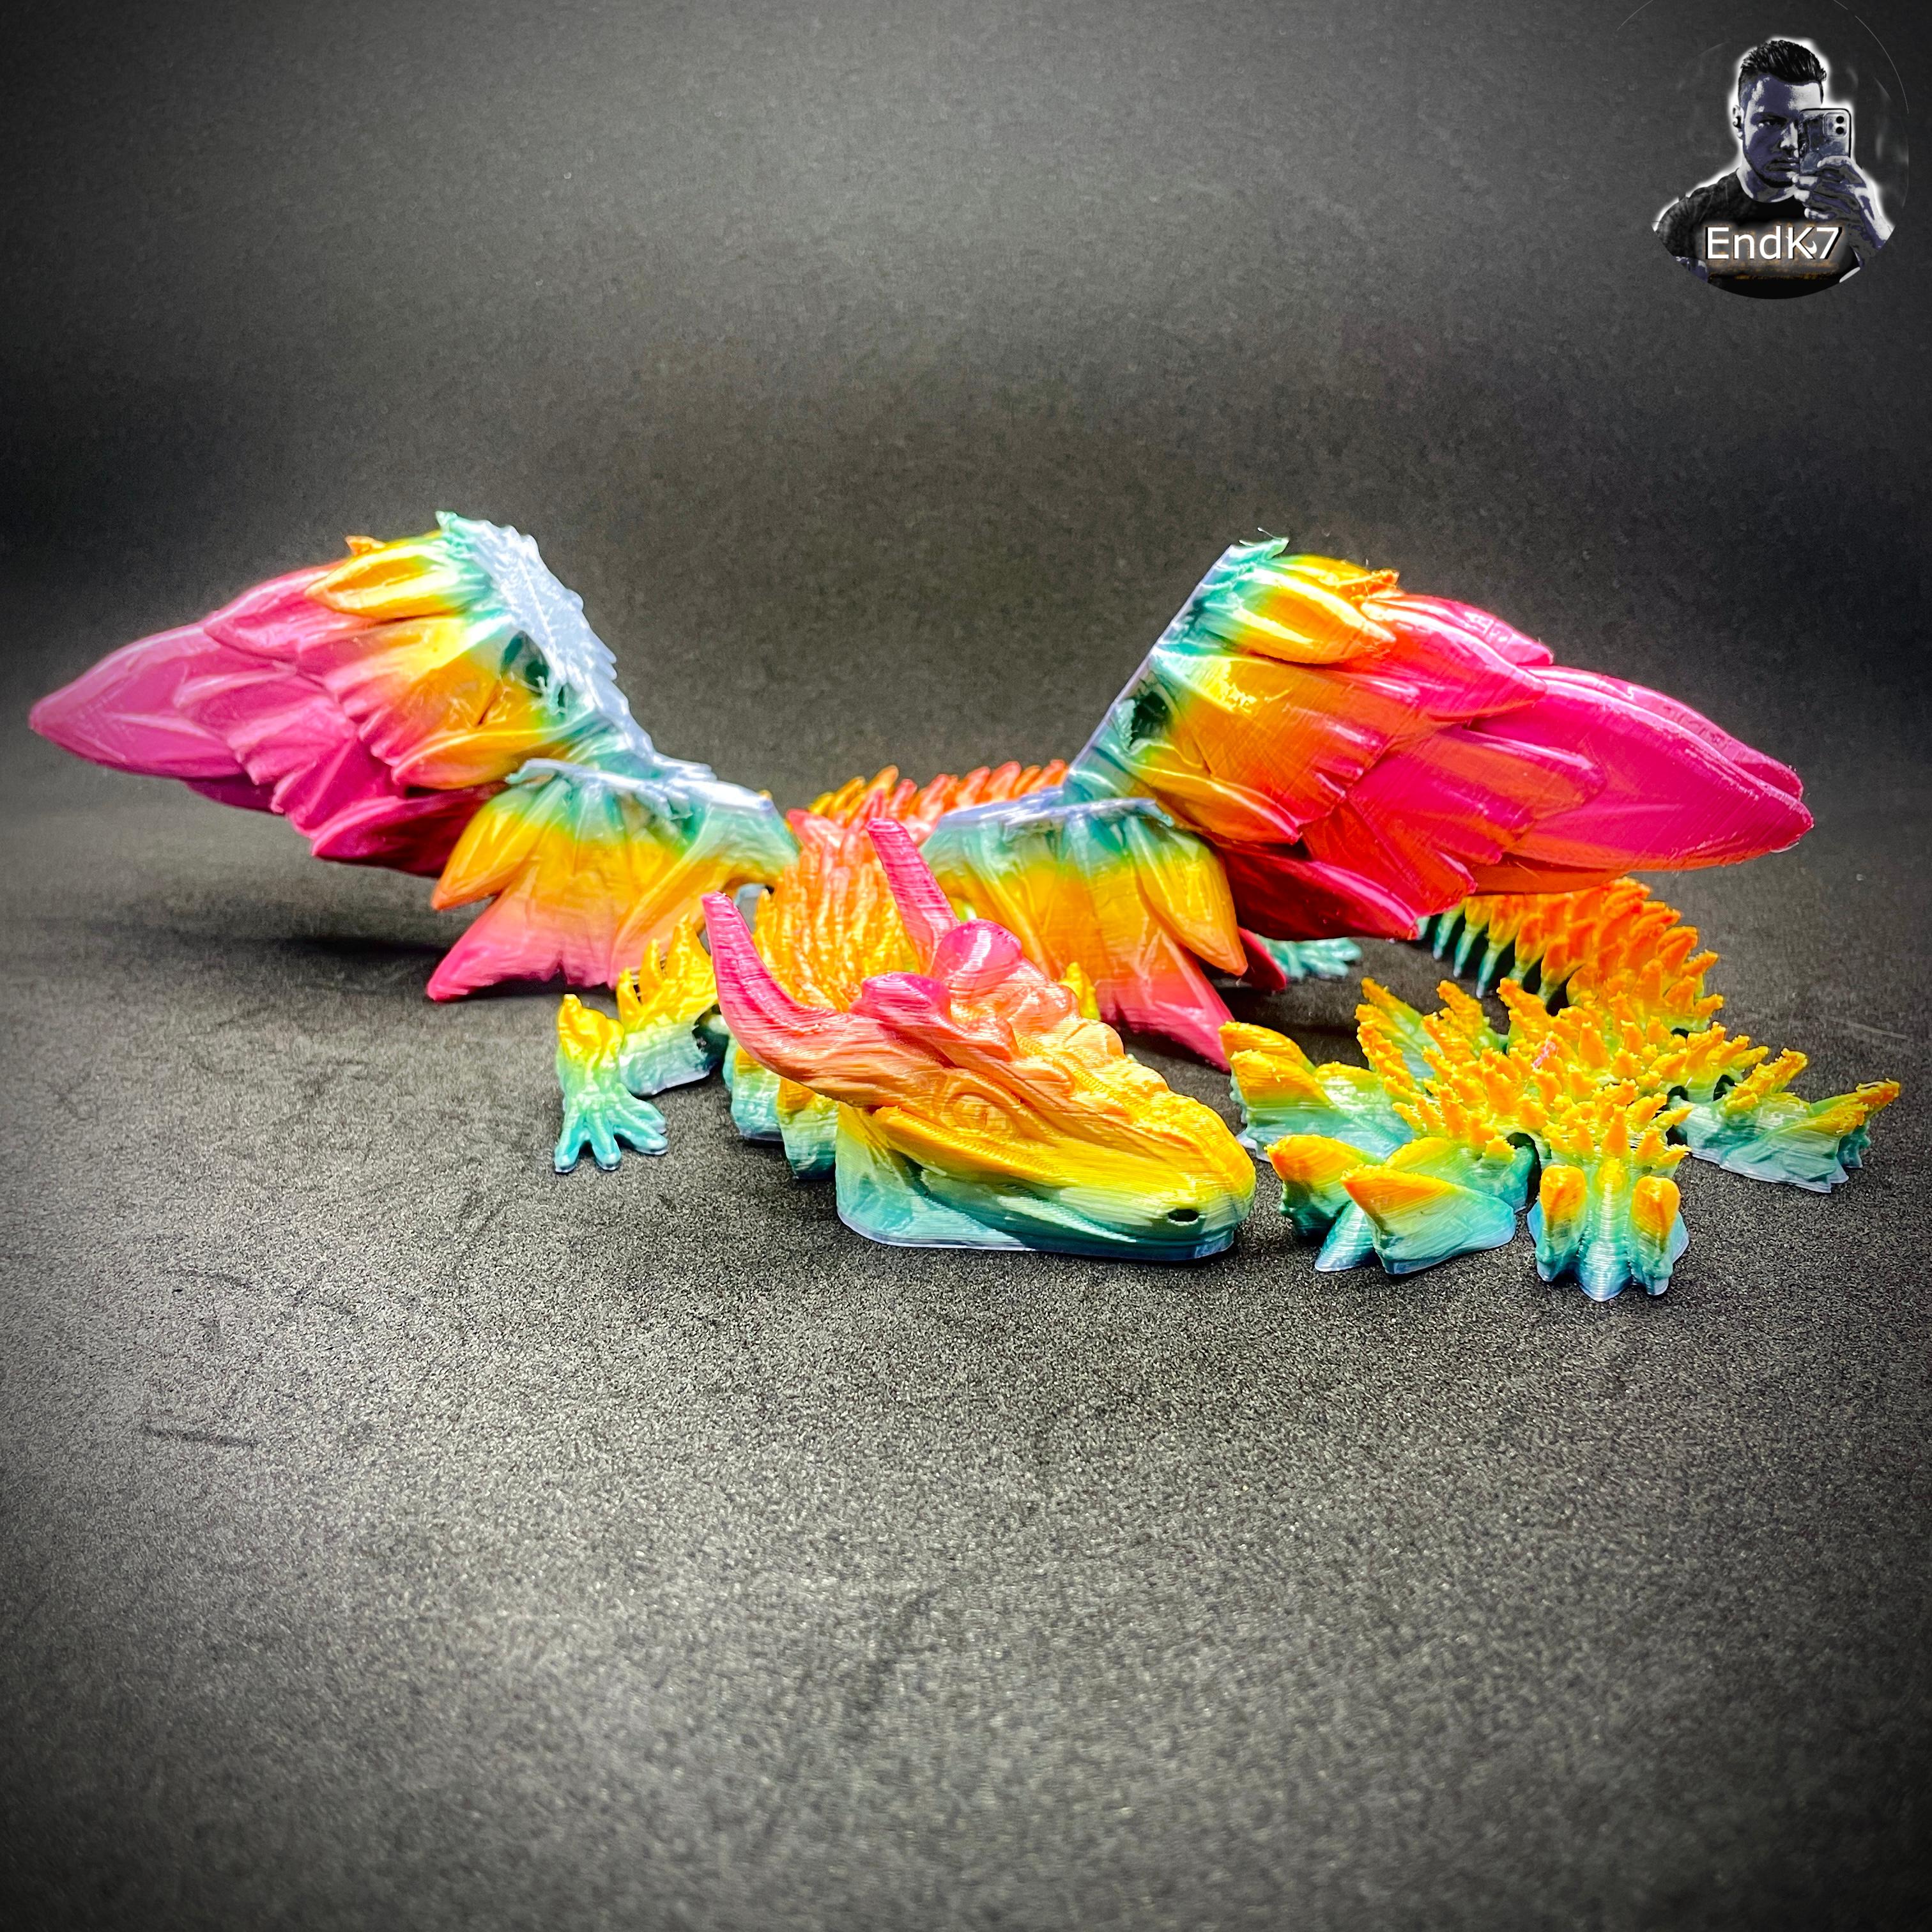 Big Glorious Dragon - Winged - Articulated - Flexi - Print in Place - No Supports - Fantasy 3d model